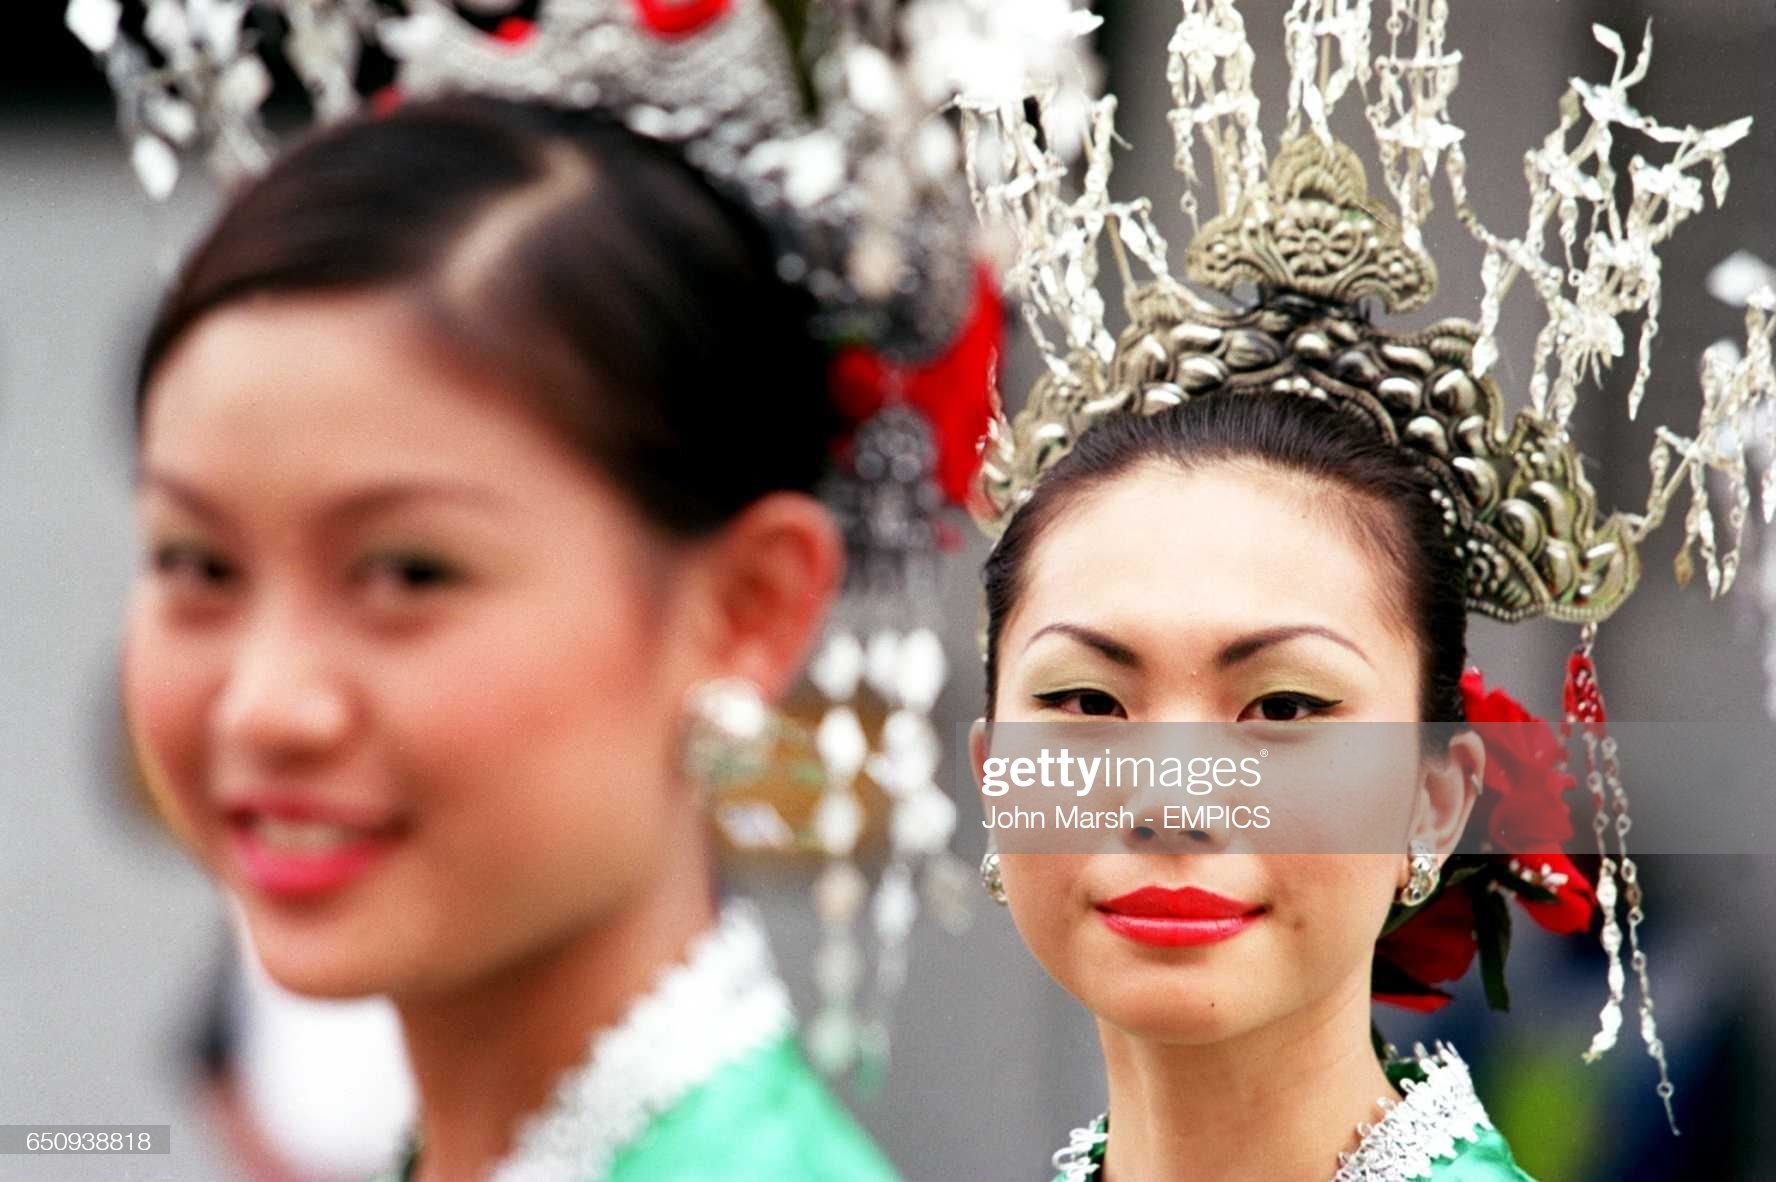 Malaysian girls in traditional costume on the grid before the race on October 22, 2000. 